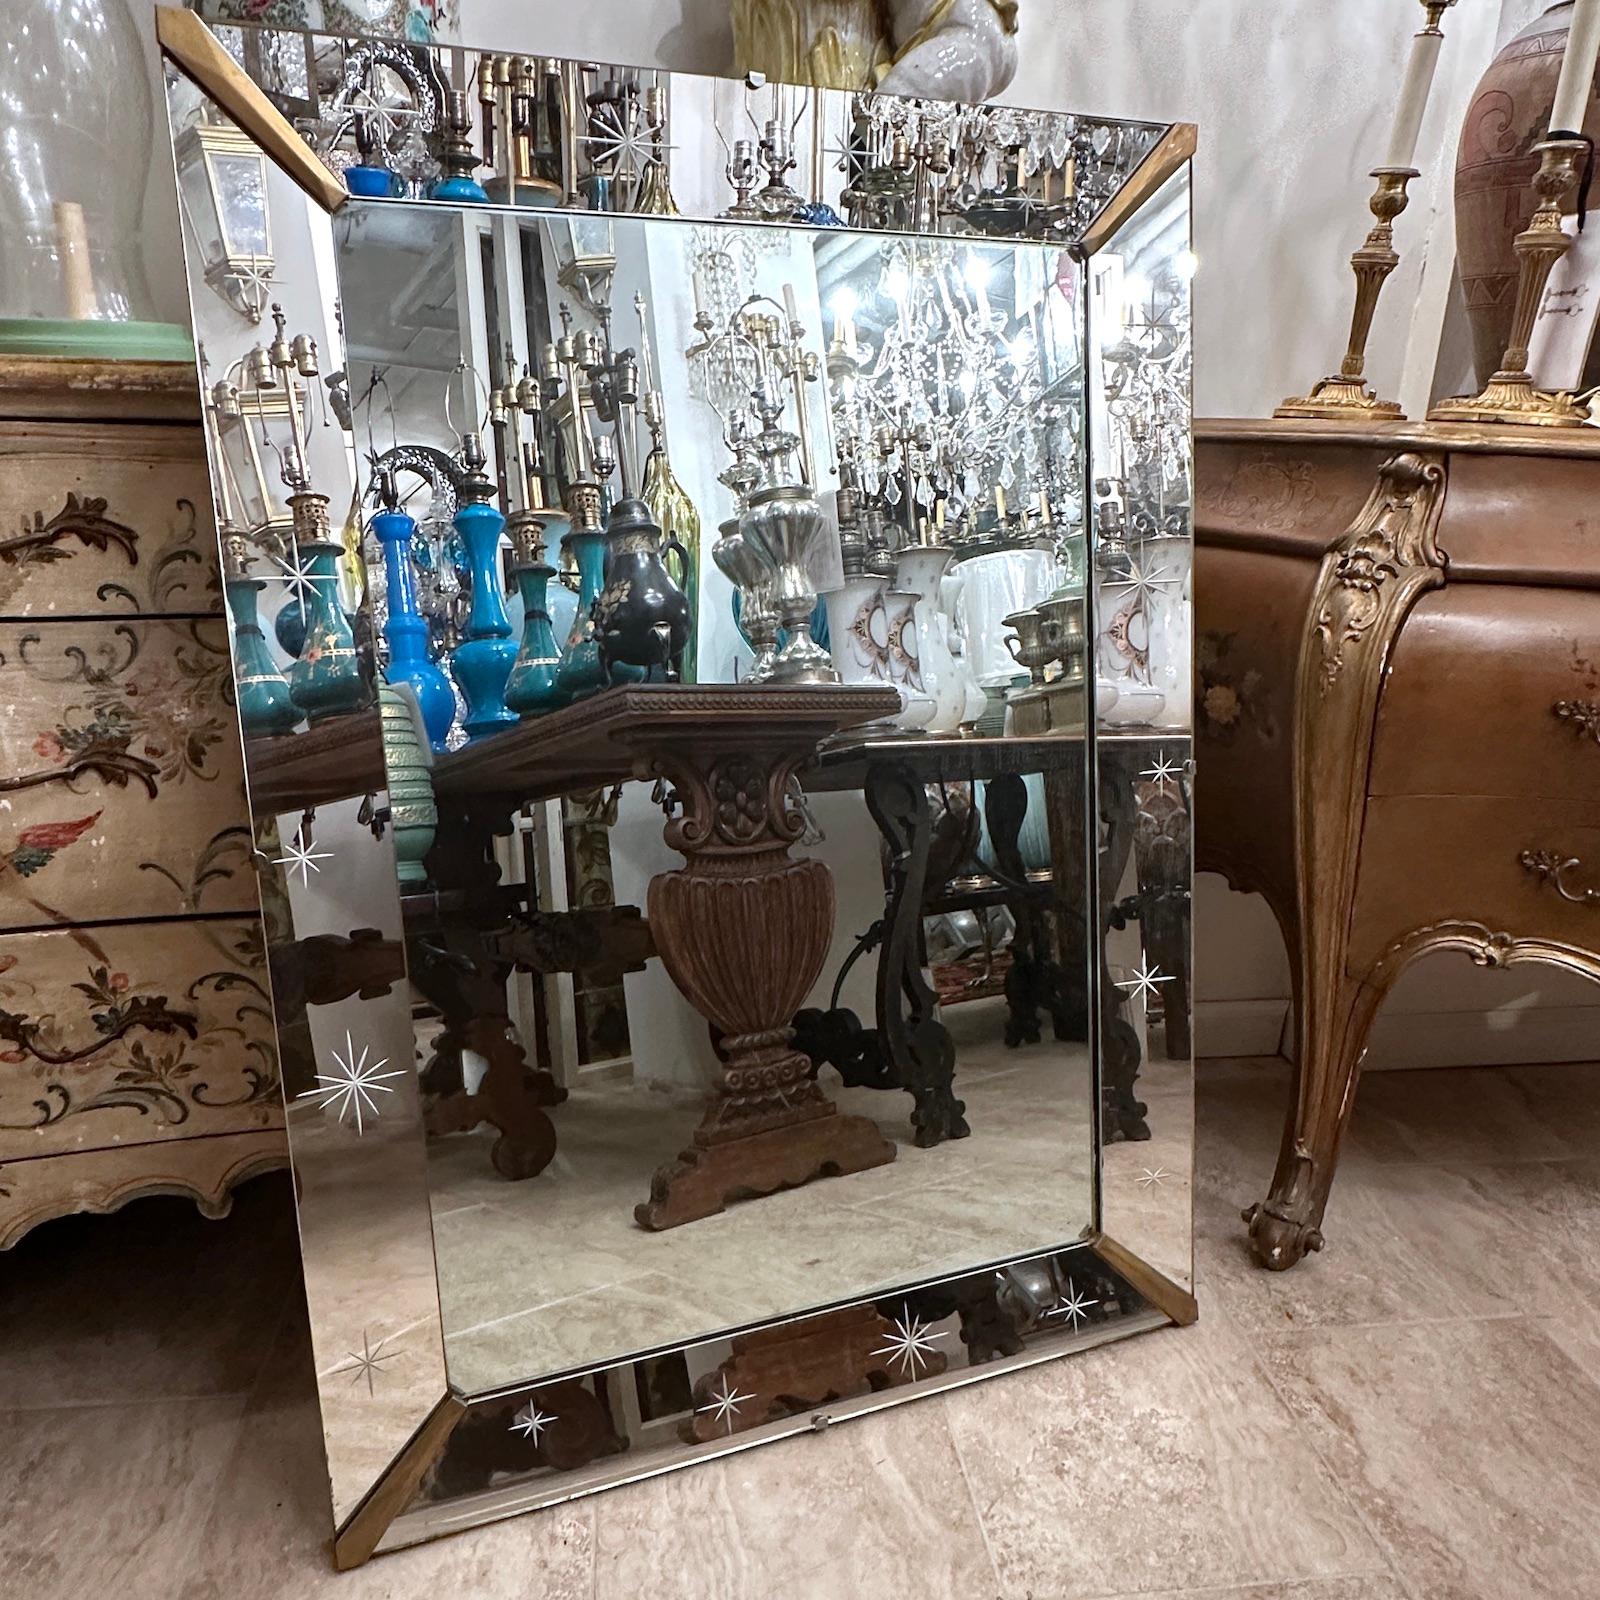 French circa 1950's etched mirror.

Measurements:
Height: 45